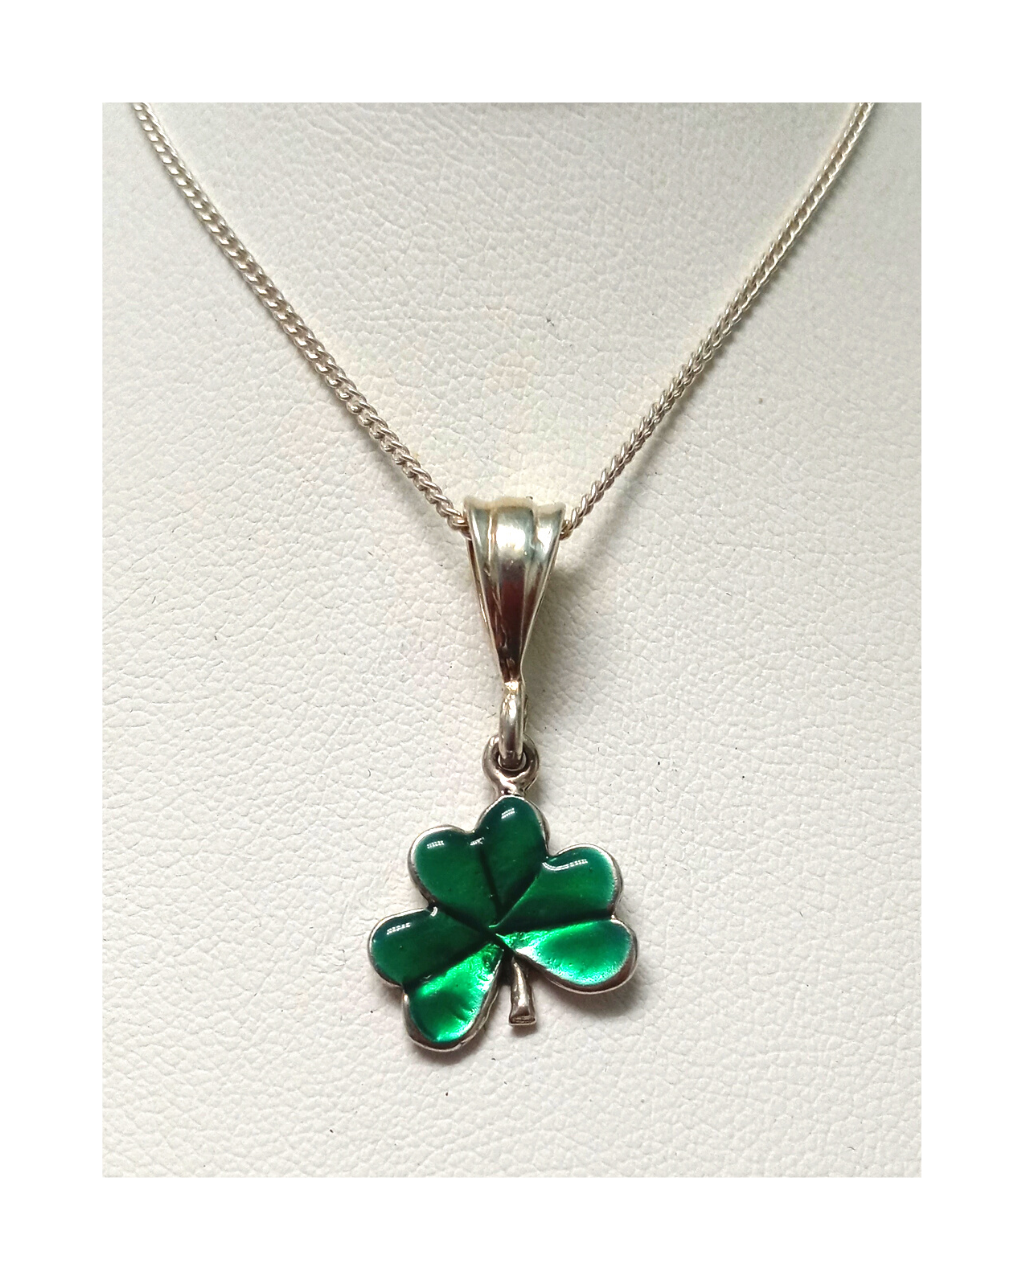 Green Hand-enameled Sterling Shamrock Removable Pendant 1 1/4"L X 5/8"W on 16" Curb Chain